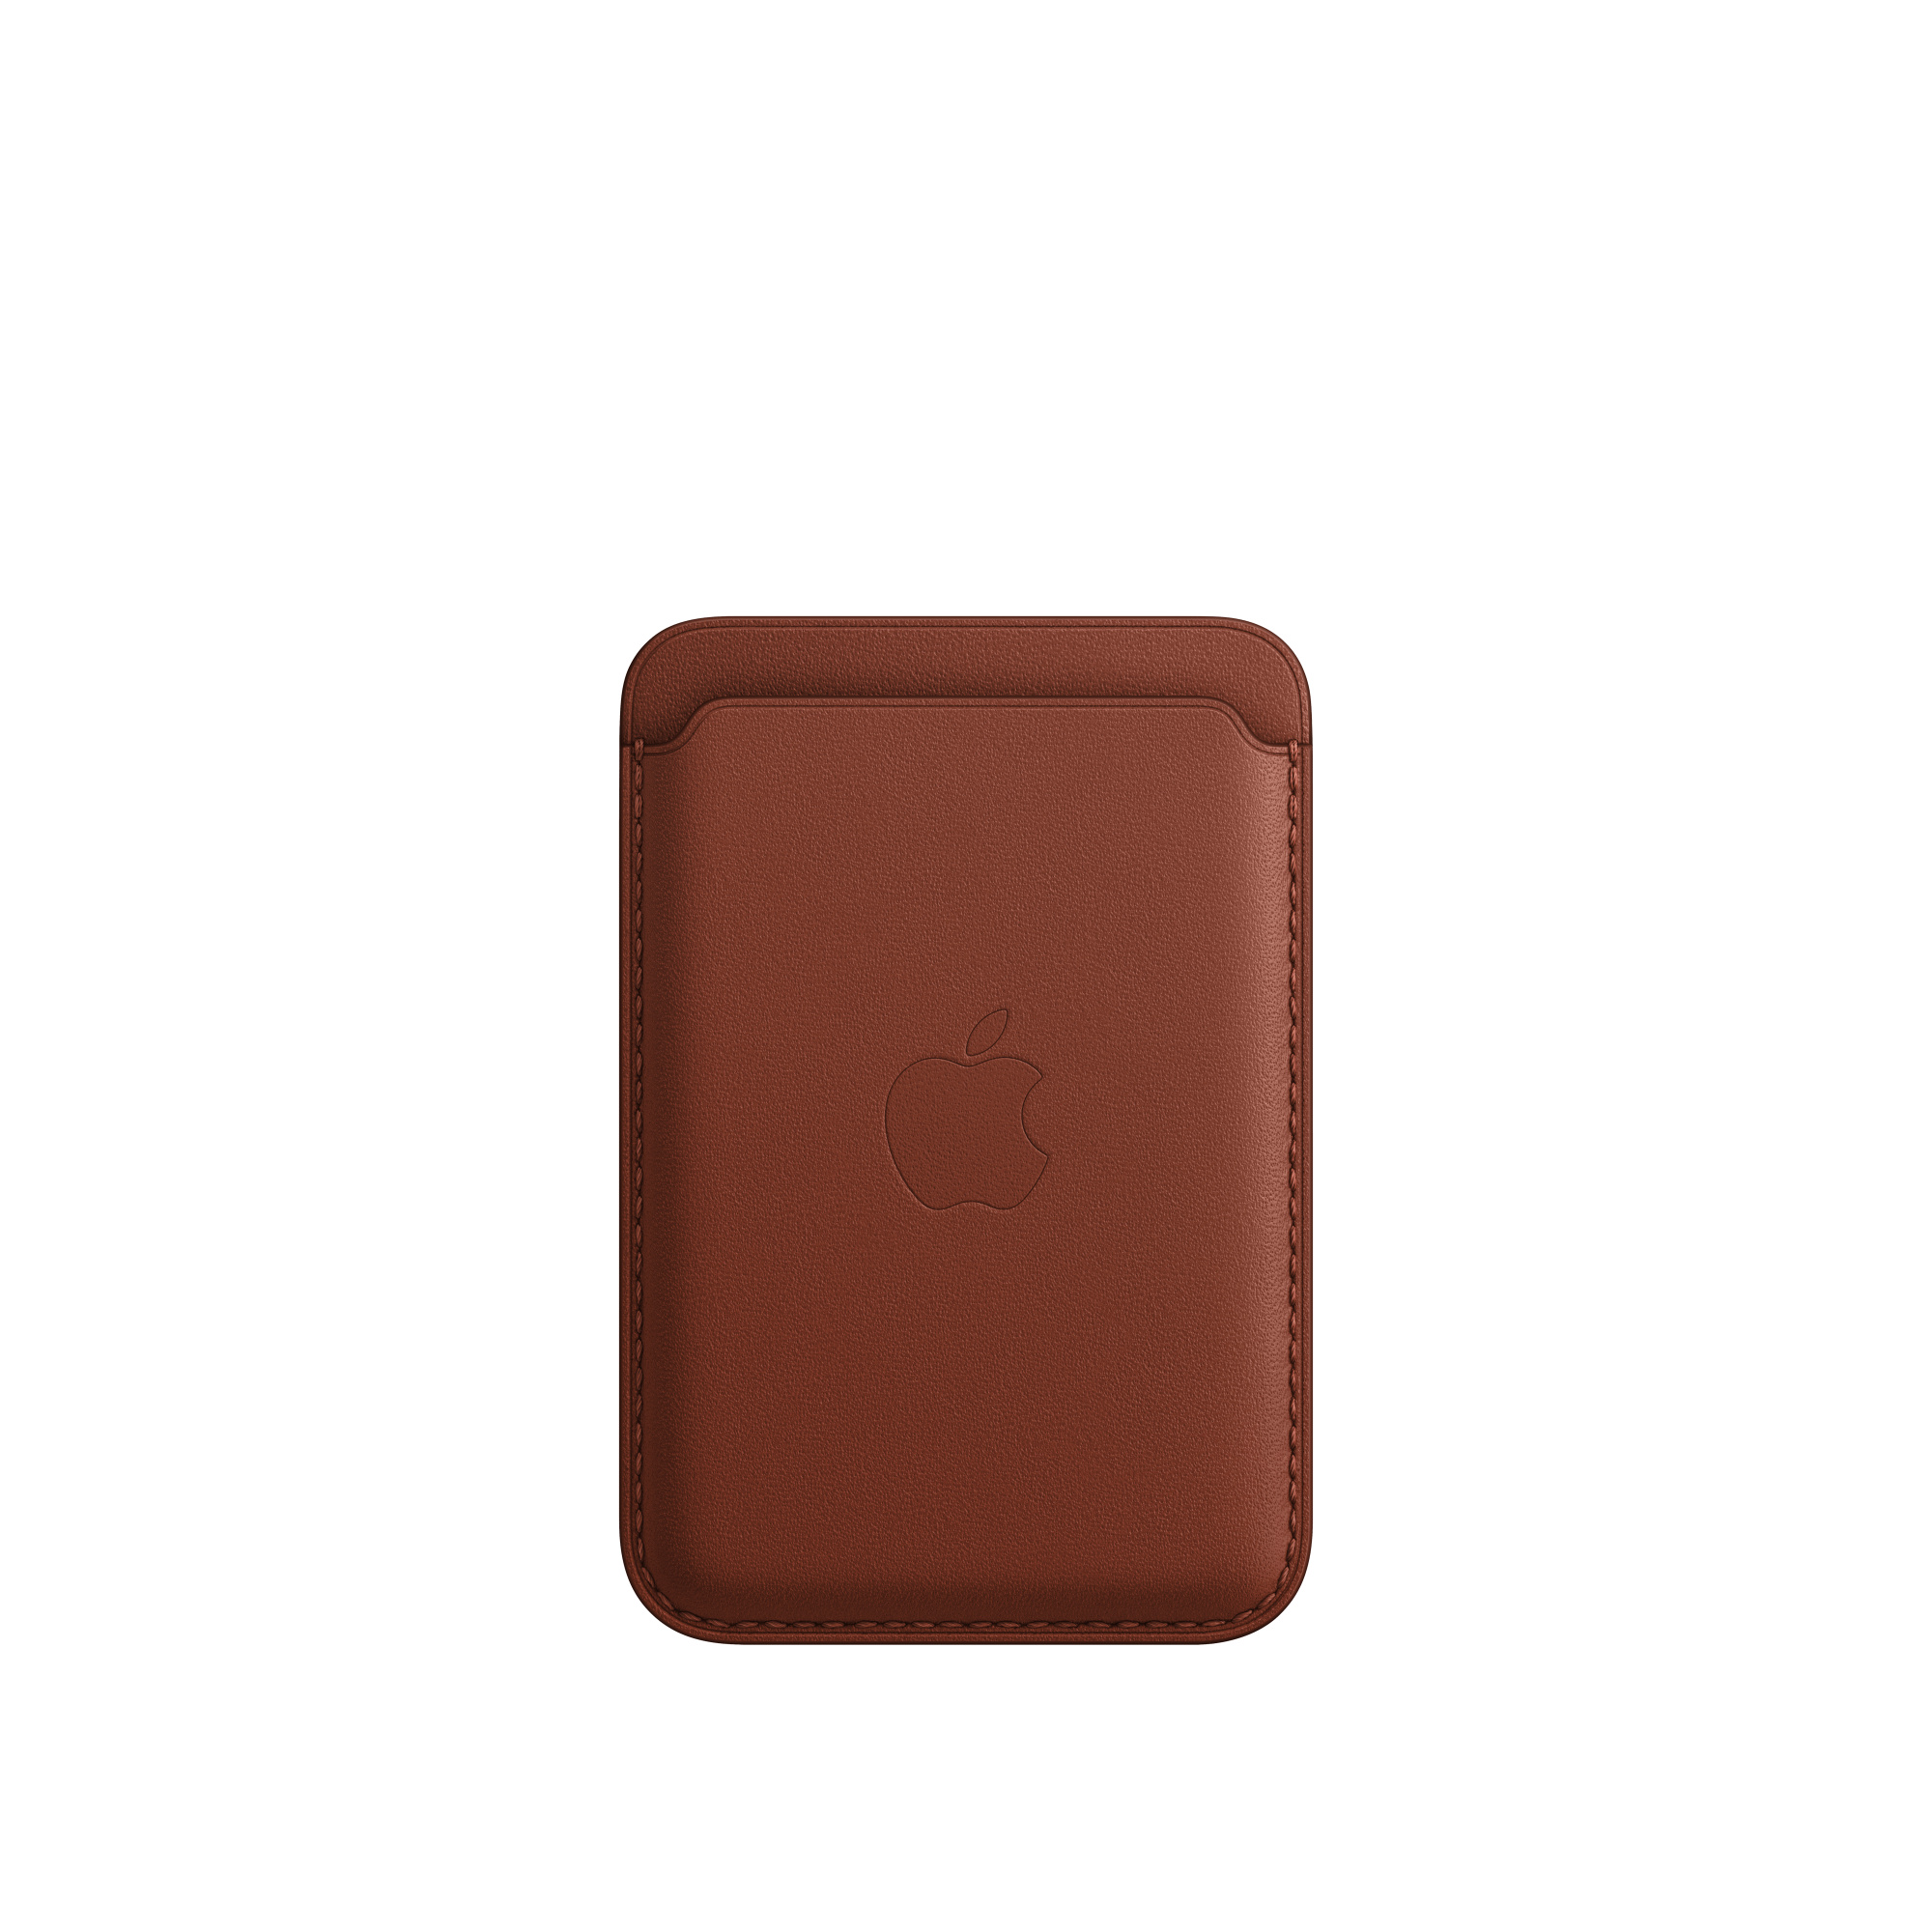 NEW Apple Leather Wallet with MagSafe